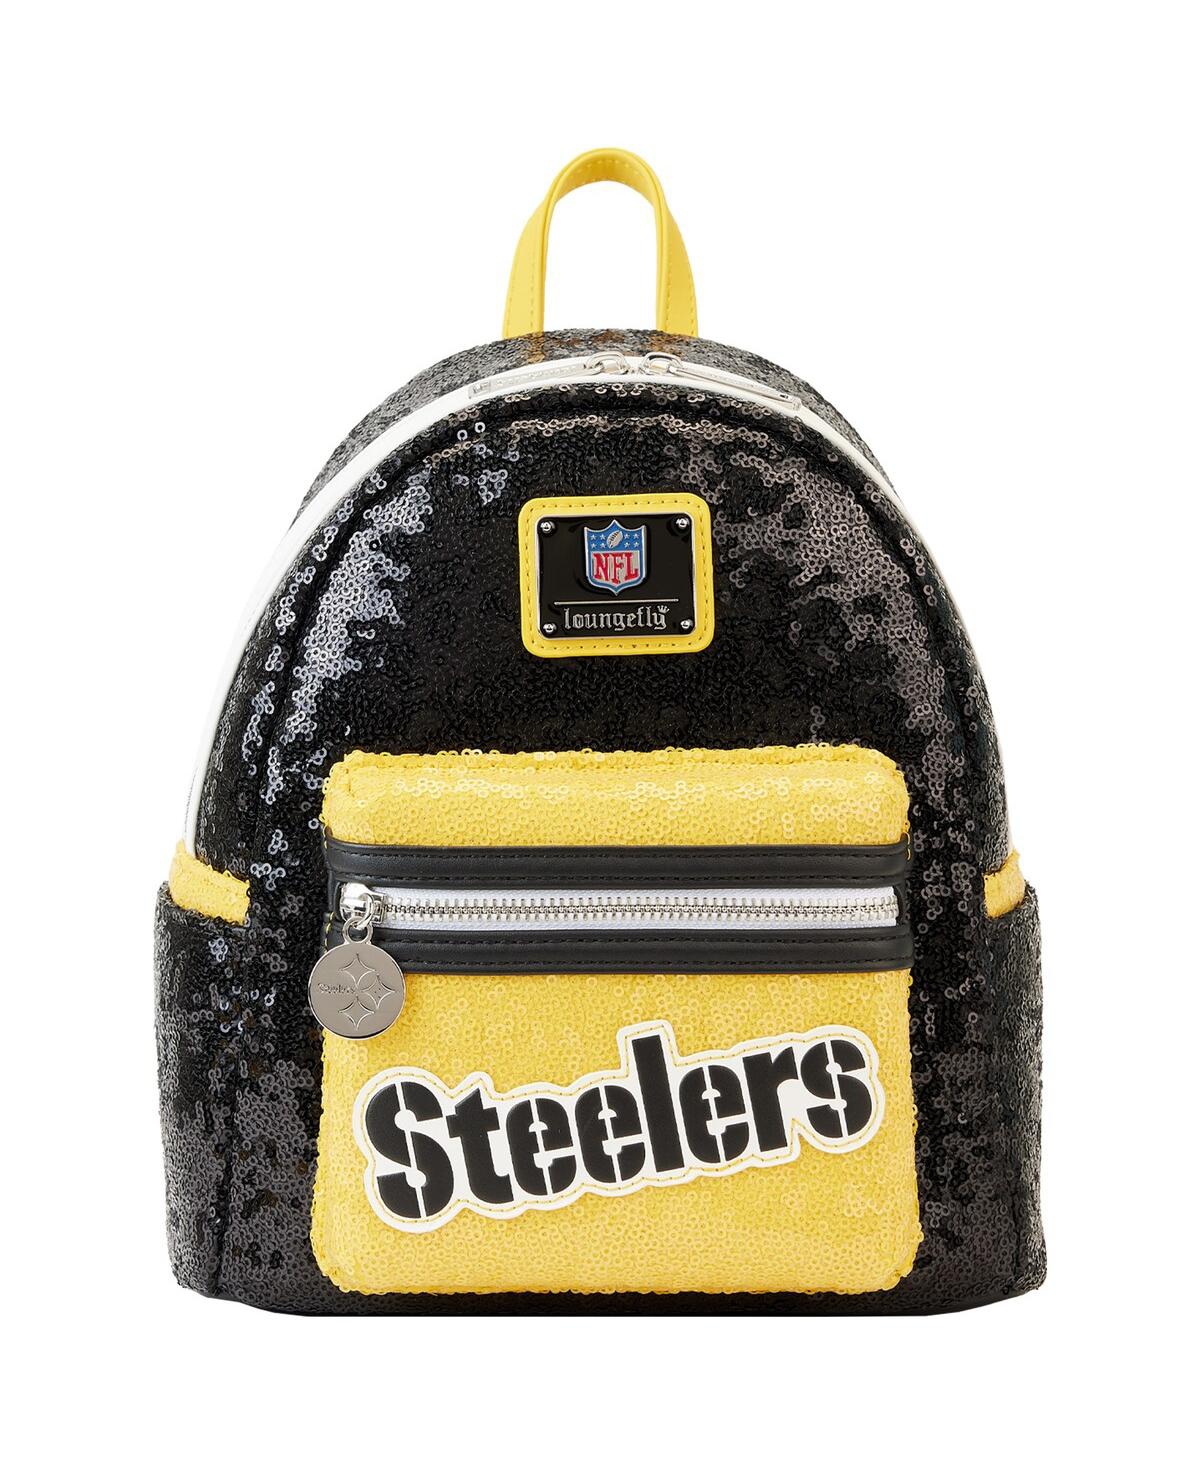 Men's and Women's Loungefly Pittsburgh Steelers Sequin Mini Backpack - Black, Yellow